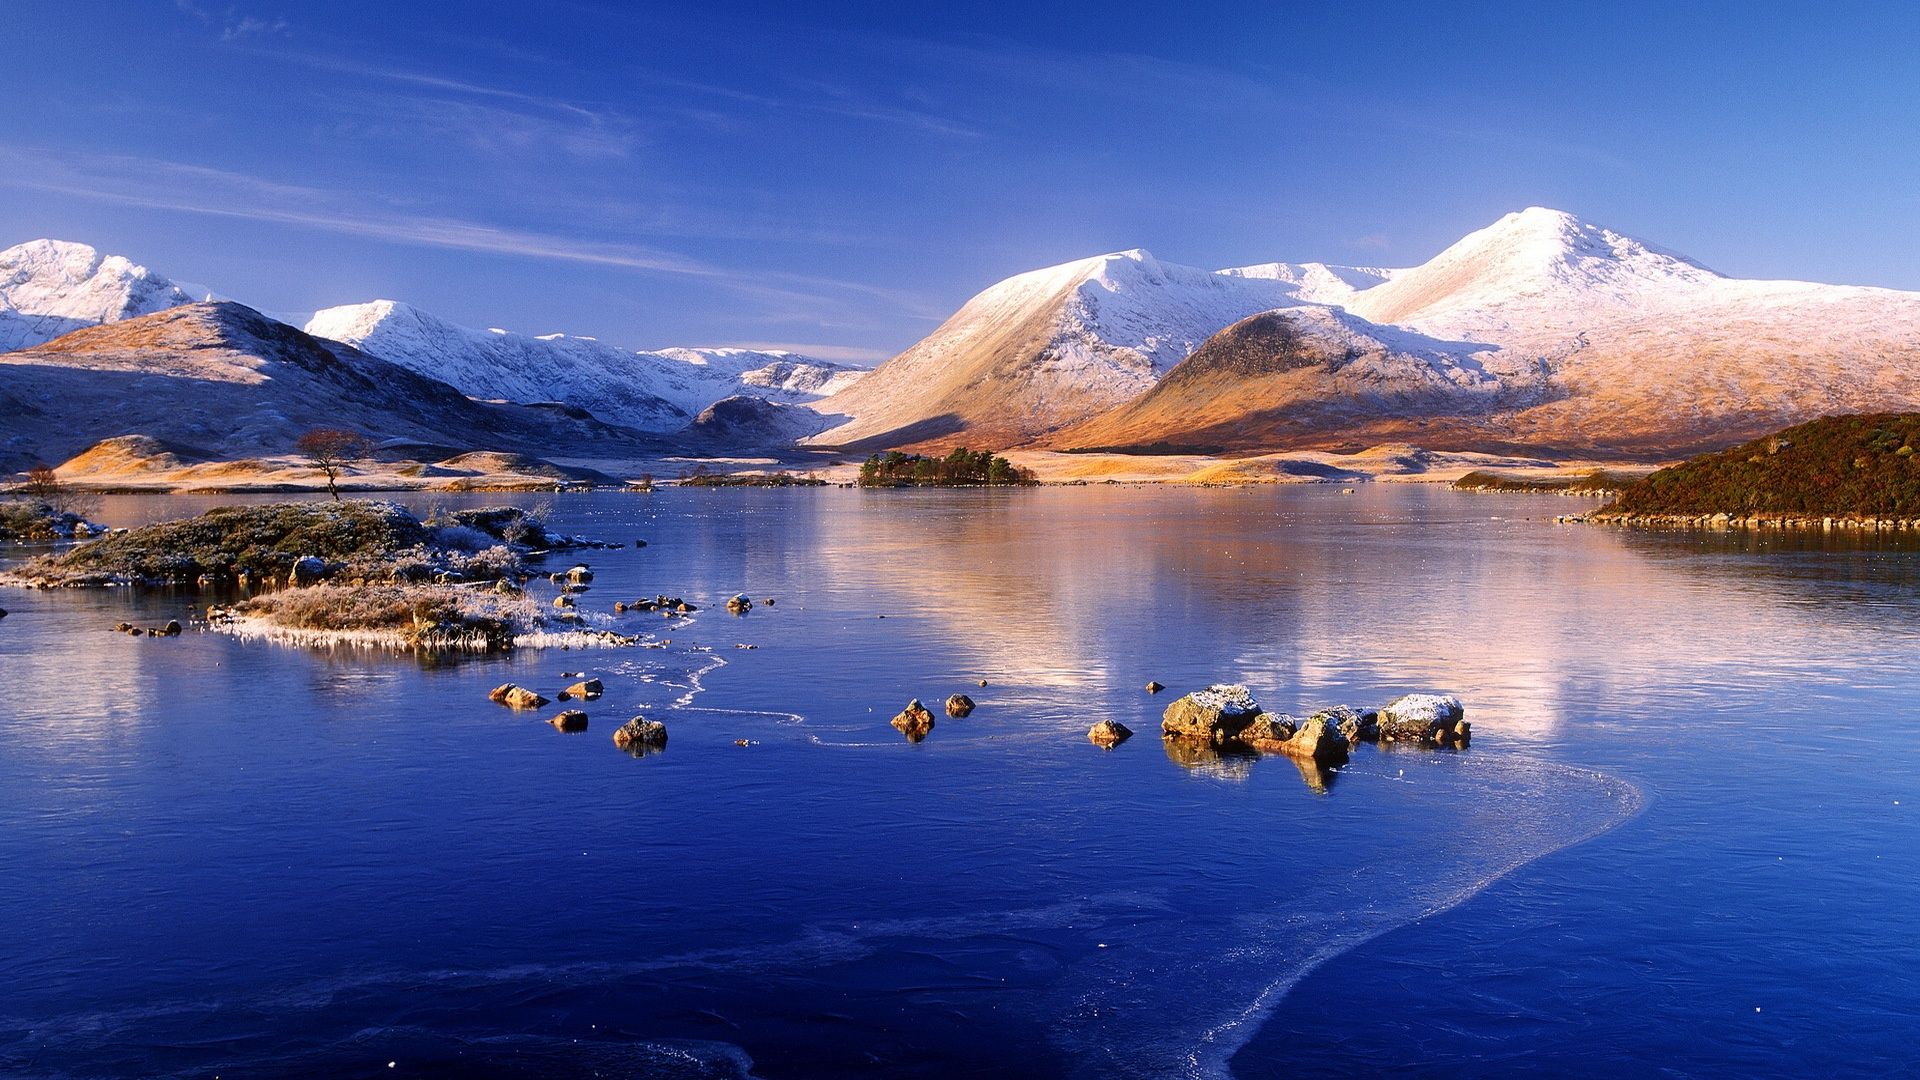 Wallpaper Winter, mountain, lake, snow, ice, blue sky 1920x1080 Full HD 2K Picture, Image